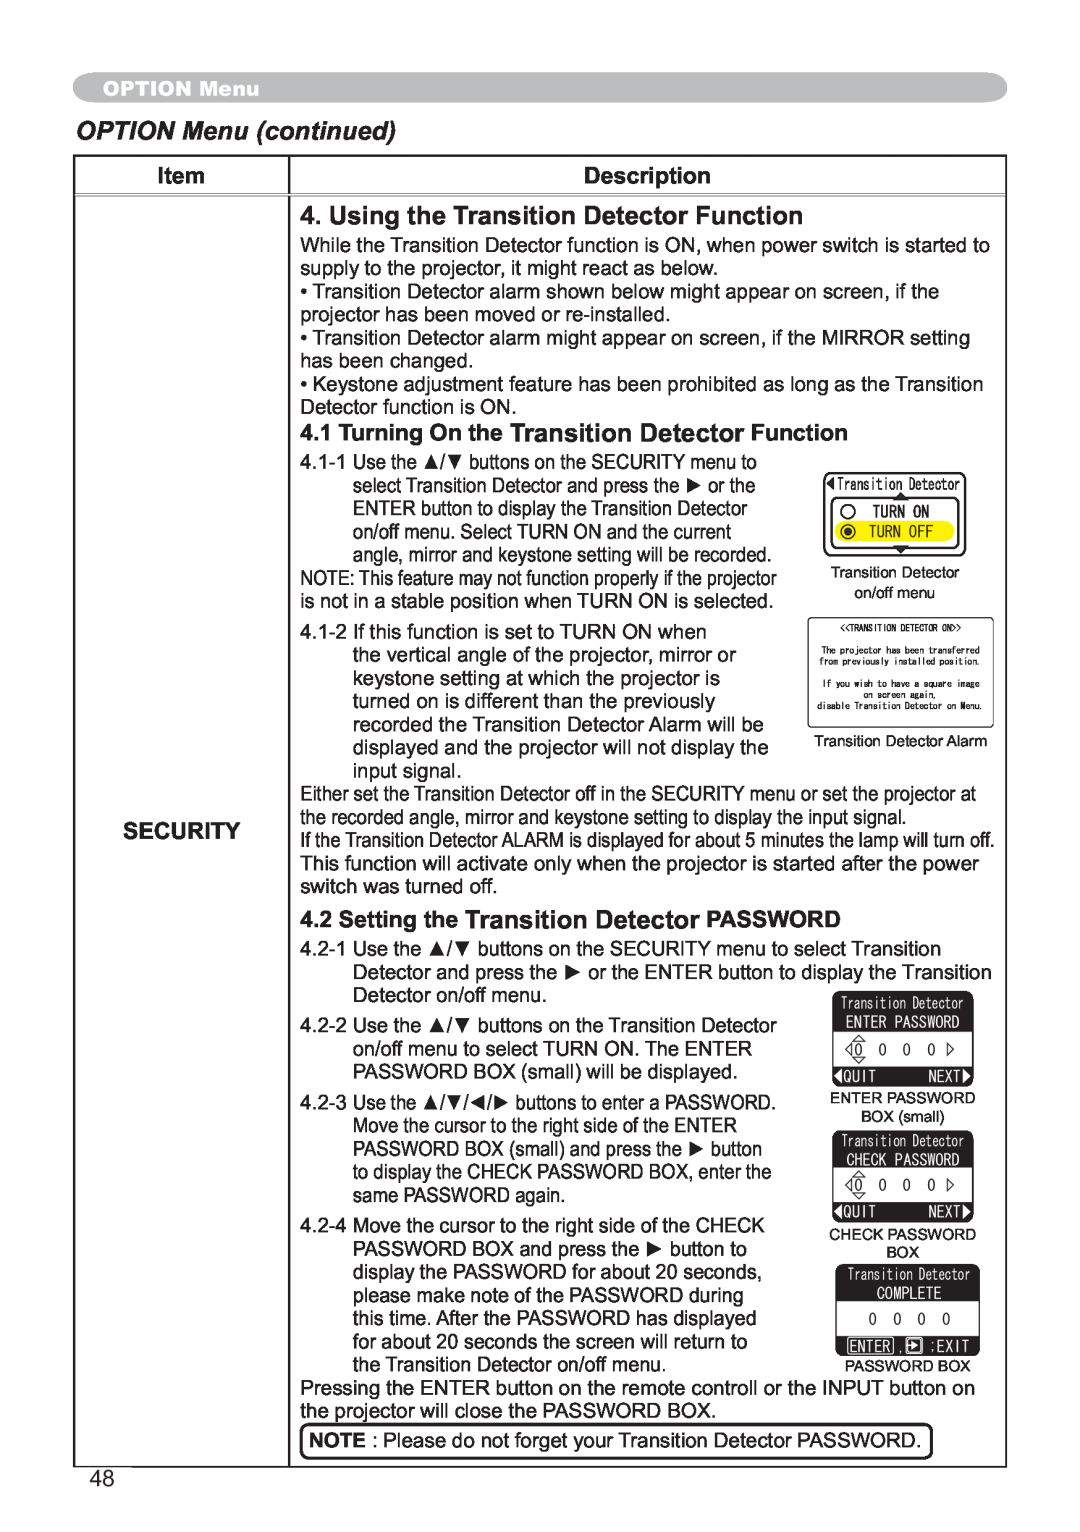 Hitachi ED-X12 user manual Using the Transition Detector Function, OPTION Menu continued, Item, Description, Security 